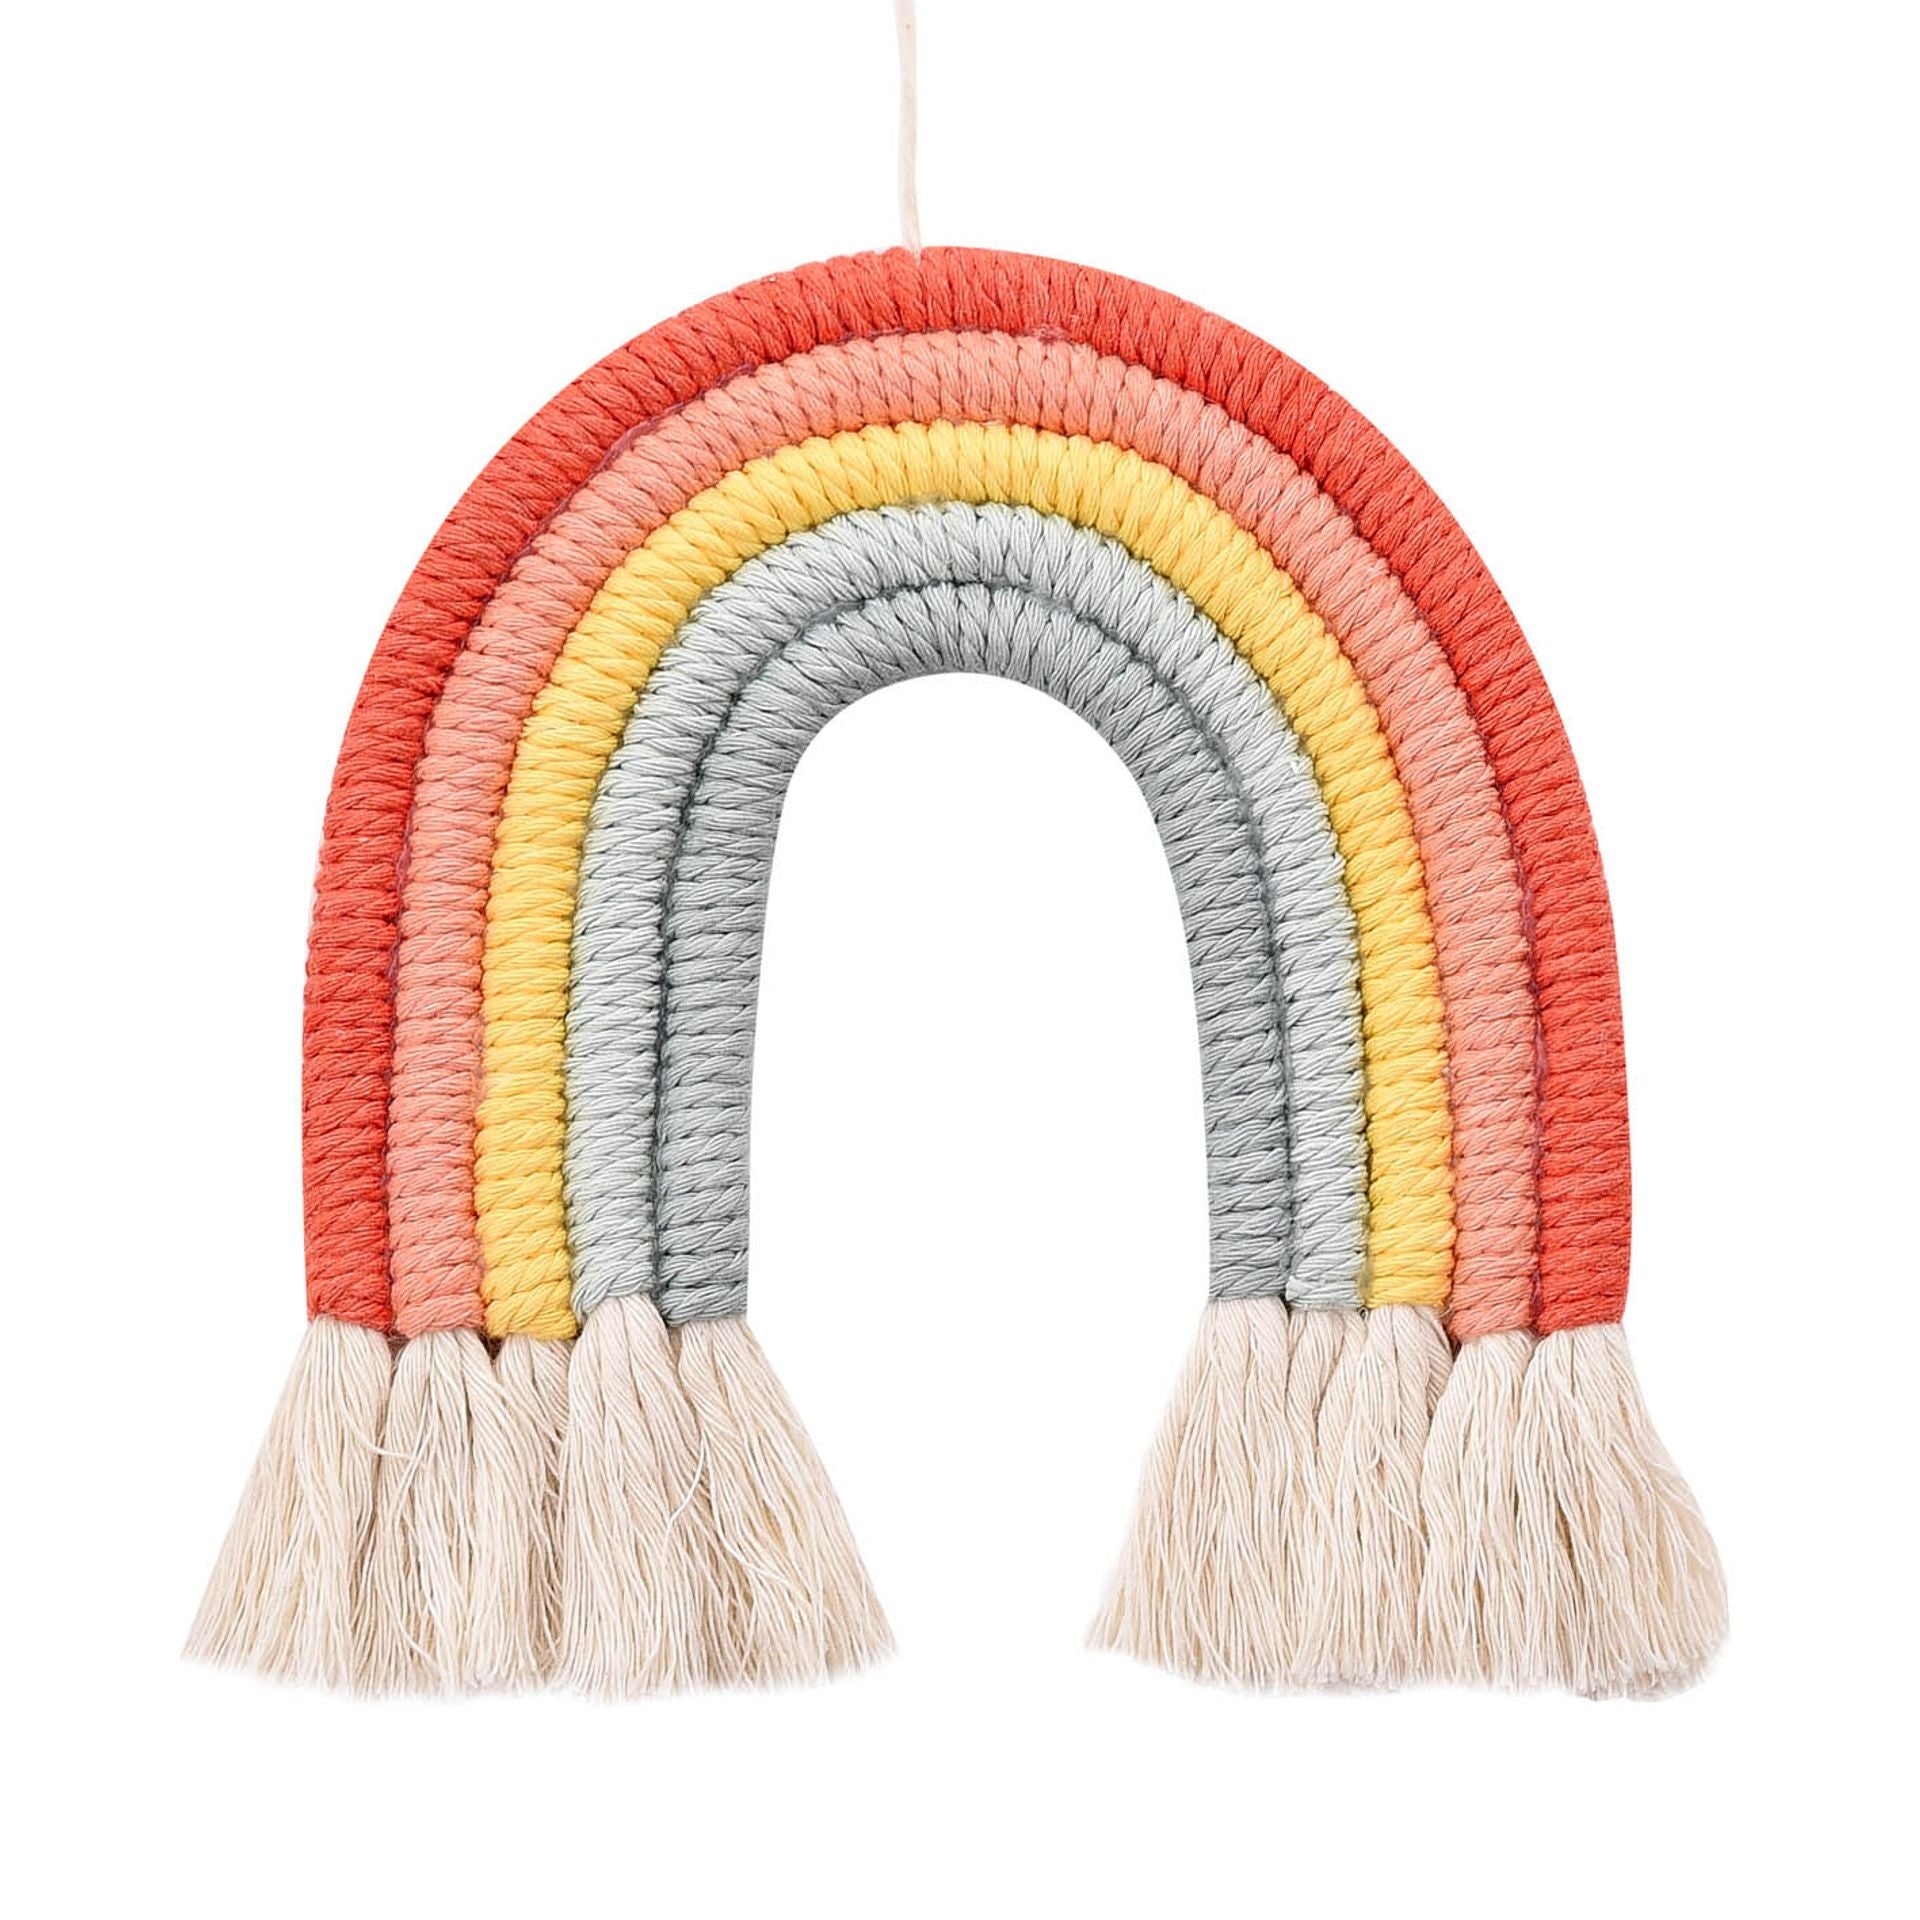 A beautiful, colourful and rustic touch to any room with this rainbow hanging plaque. 